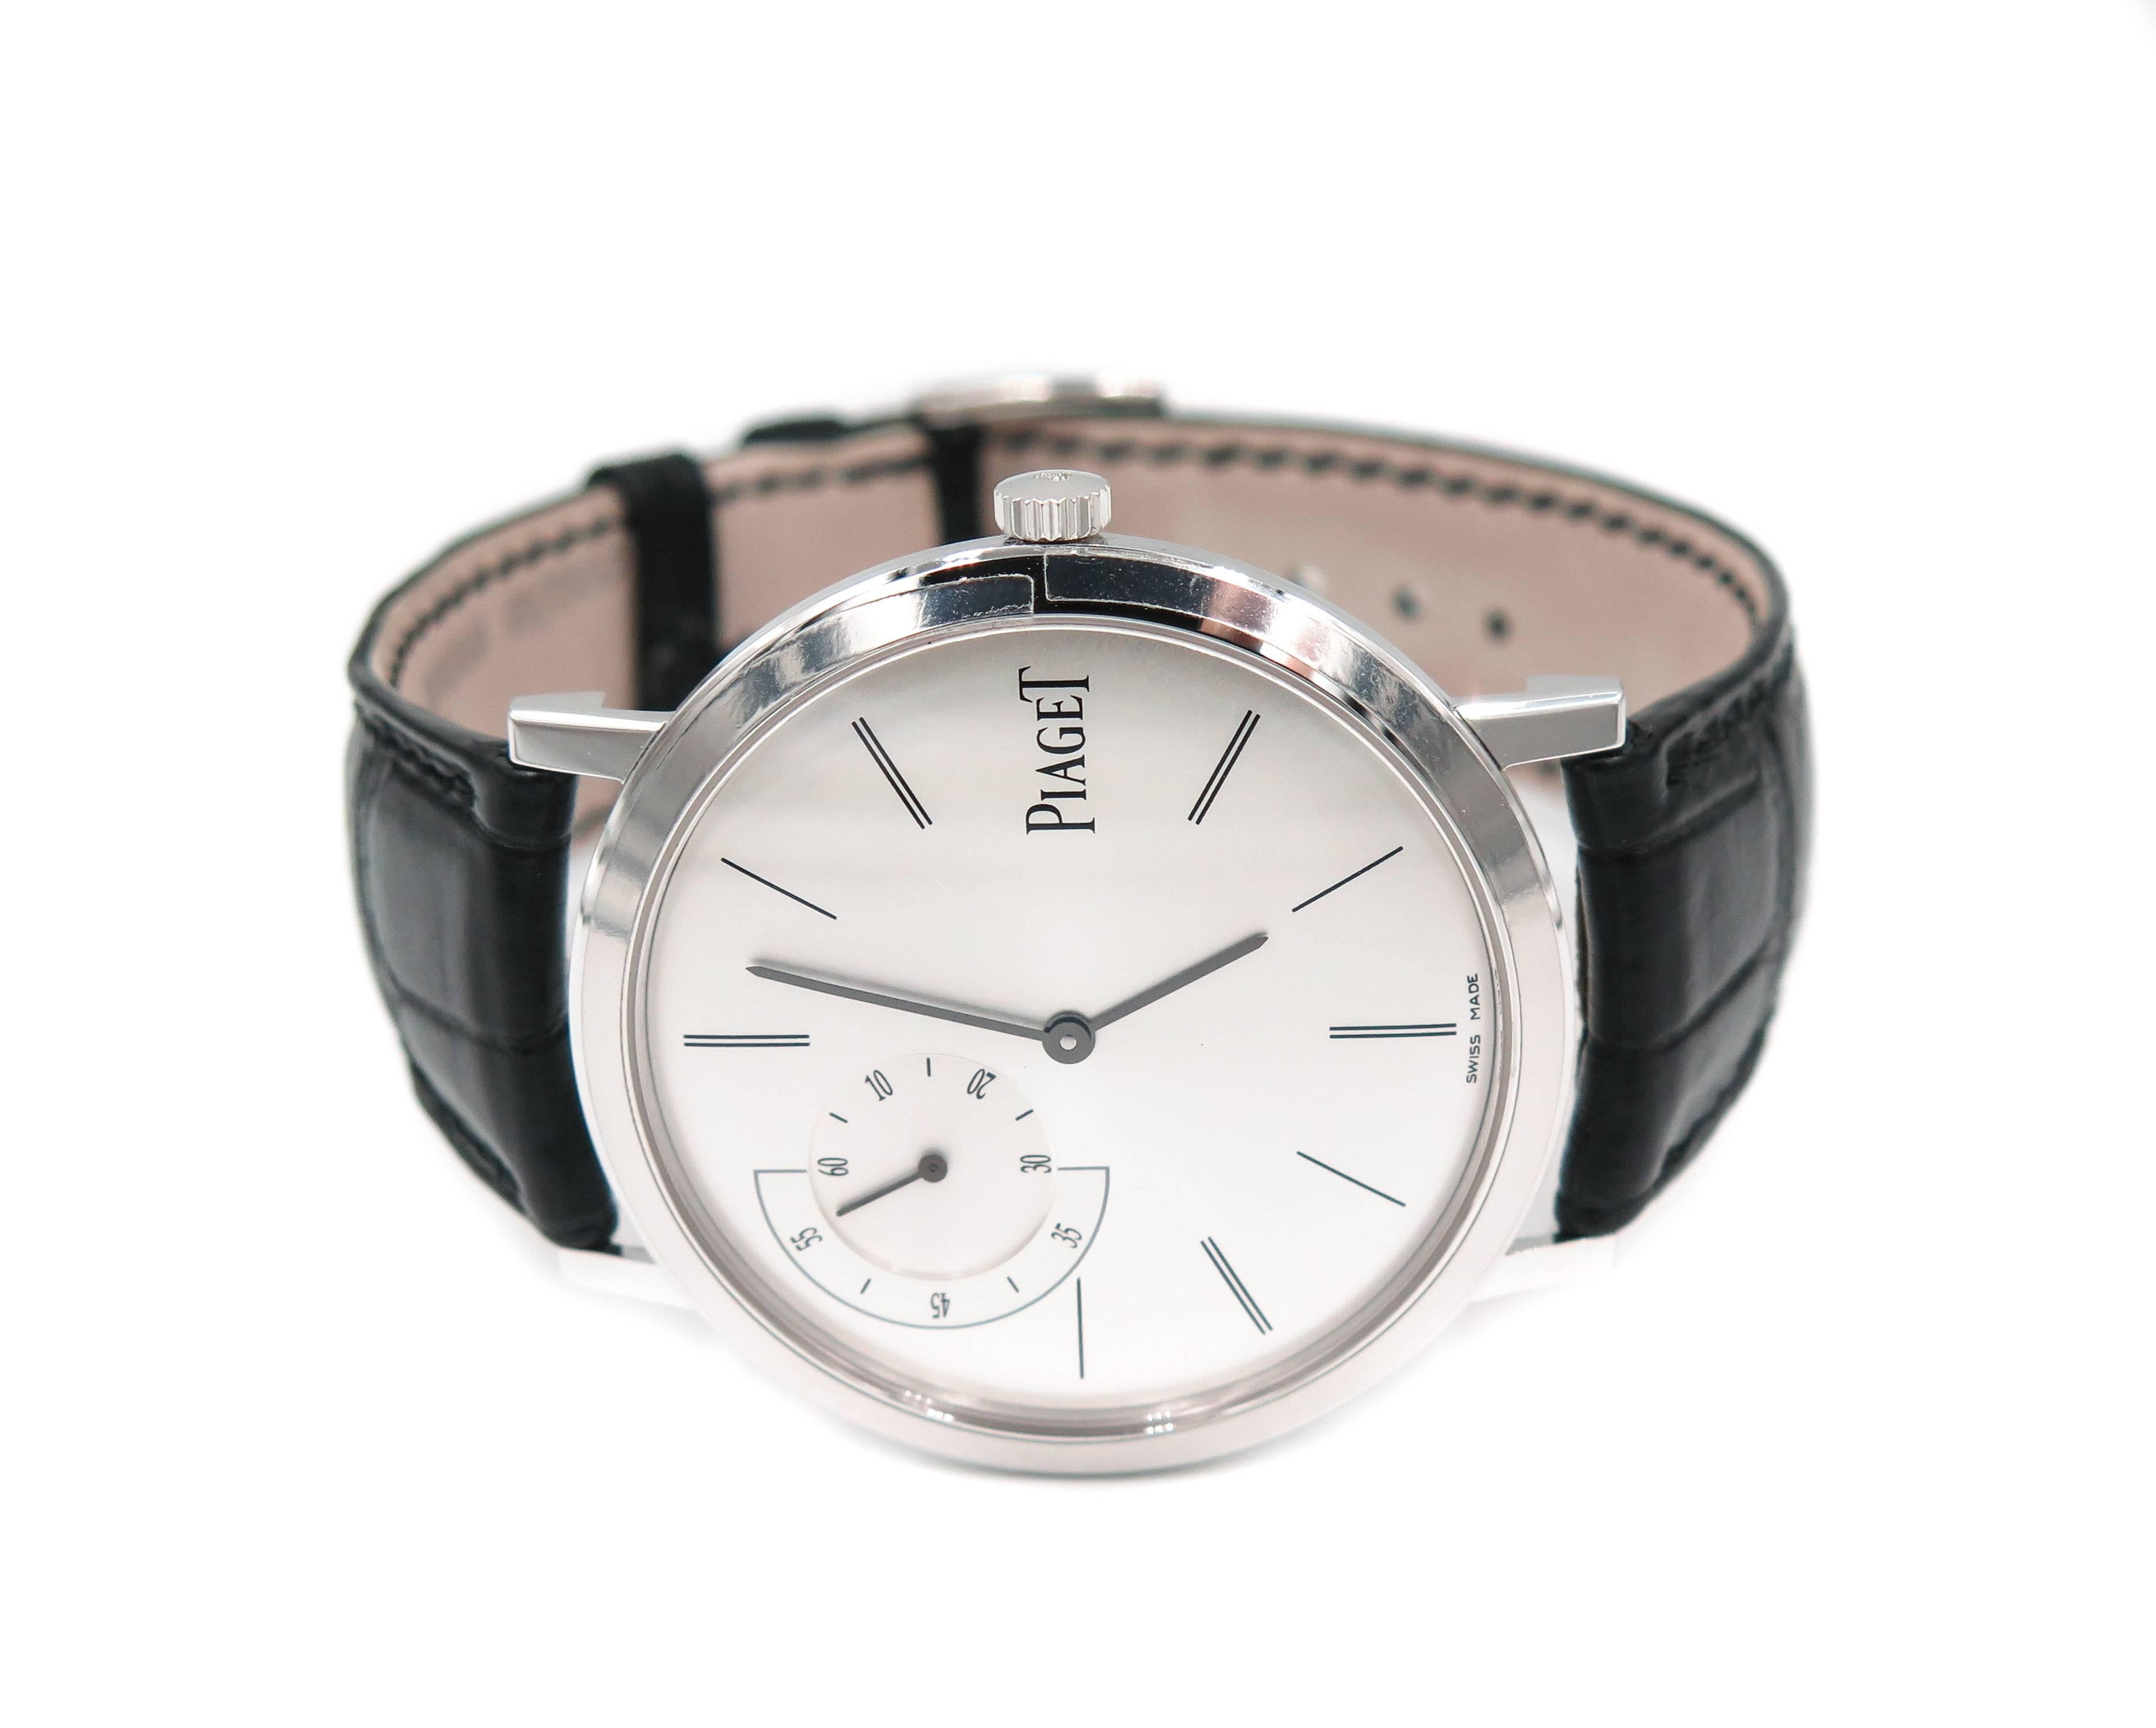 Piaget revolutionized the watchmaking world by launching an ultra-thin watch defining the codes of a new elegance. 
The unprecedented thinness of its profile and the purity of its dial endowed it with a distinguished look that immediately earned it